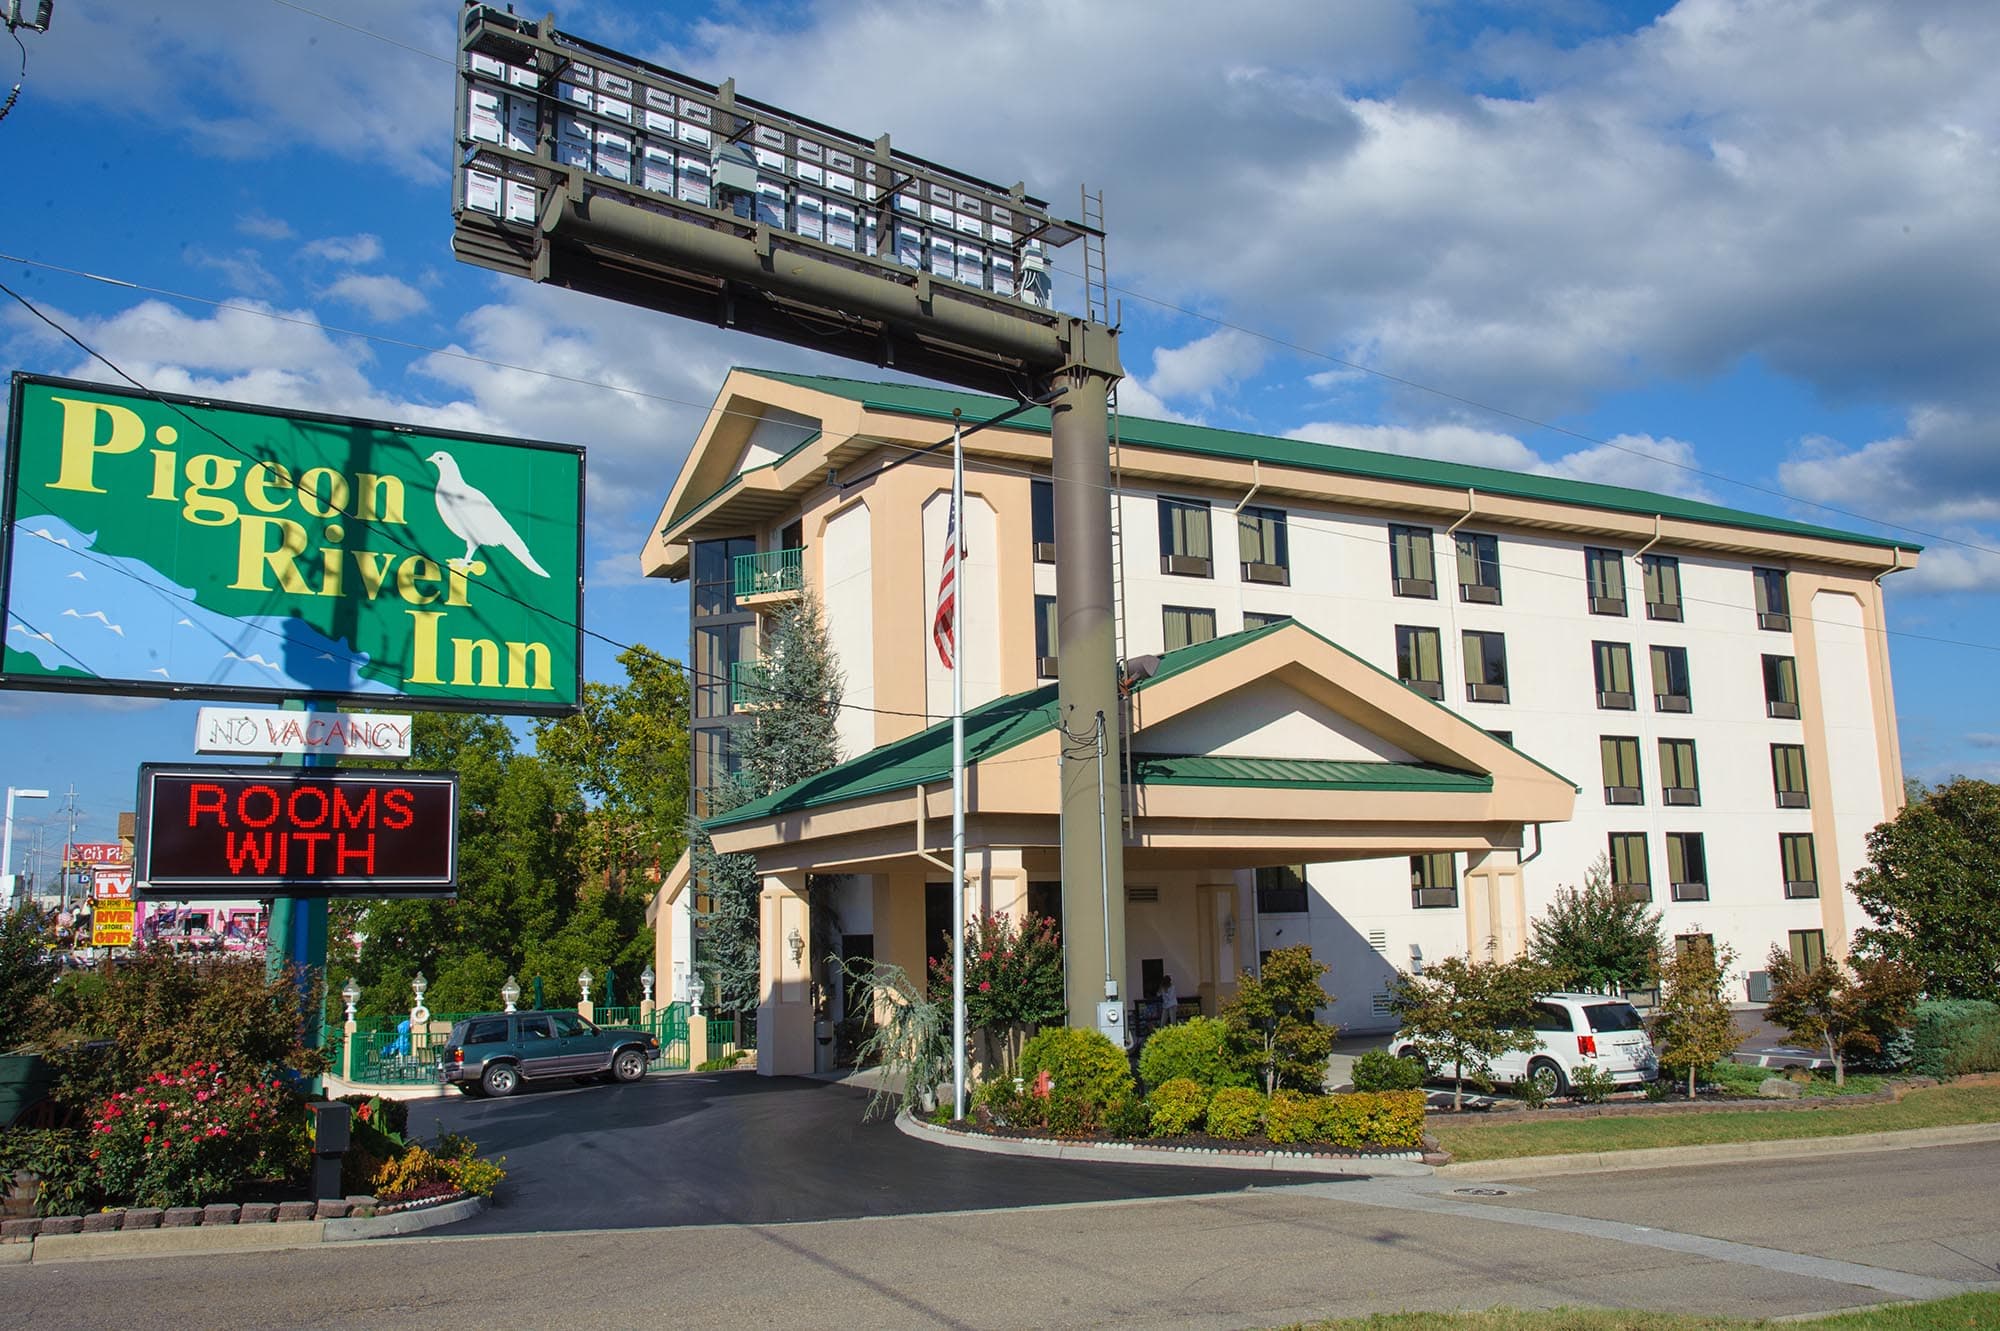 Pigeon River Inn Exterior Image showing the front side and signage